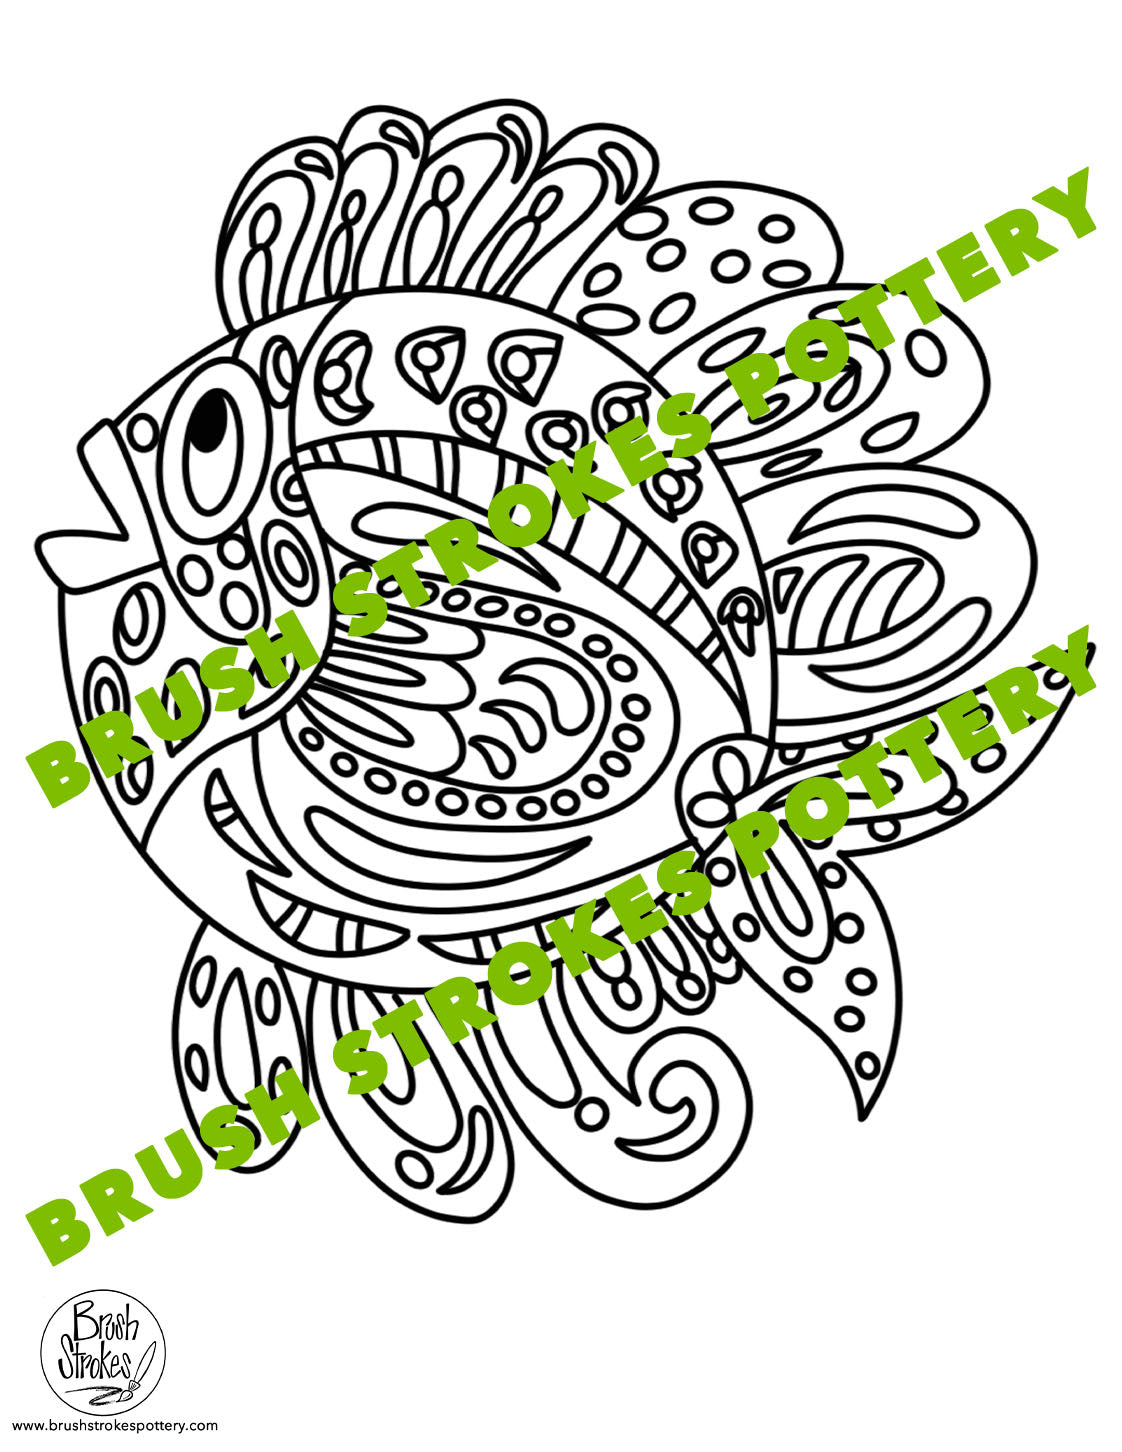 Tropical fish coloring page â brush strokes pottery